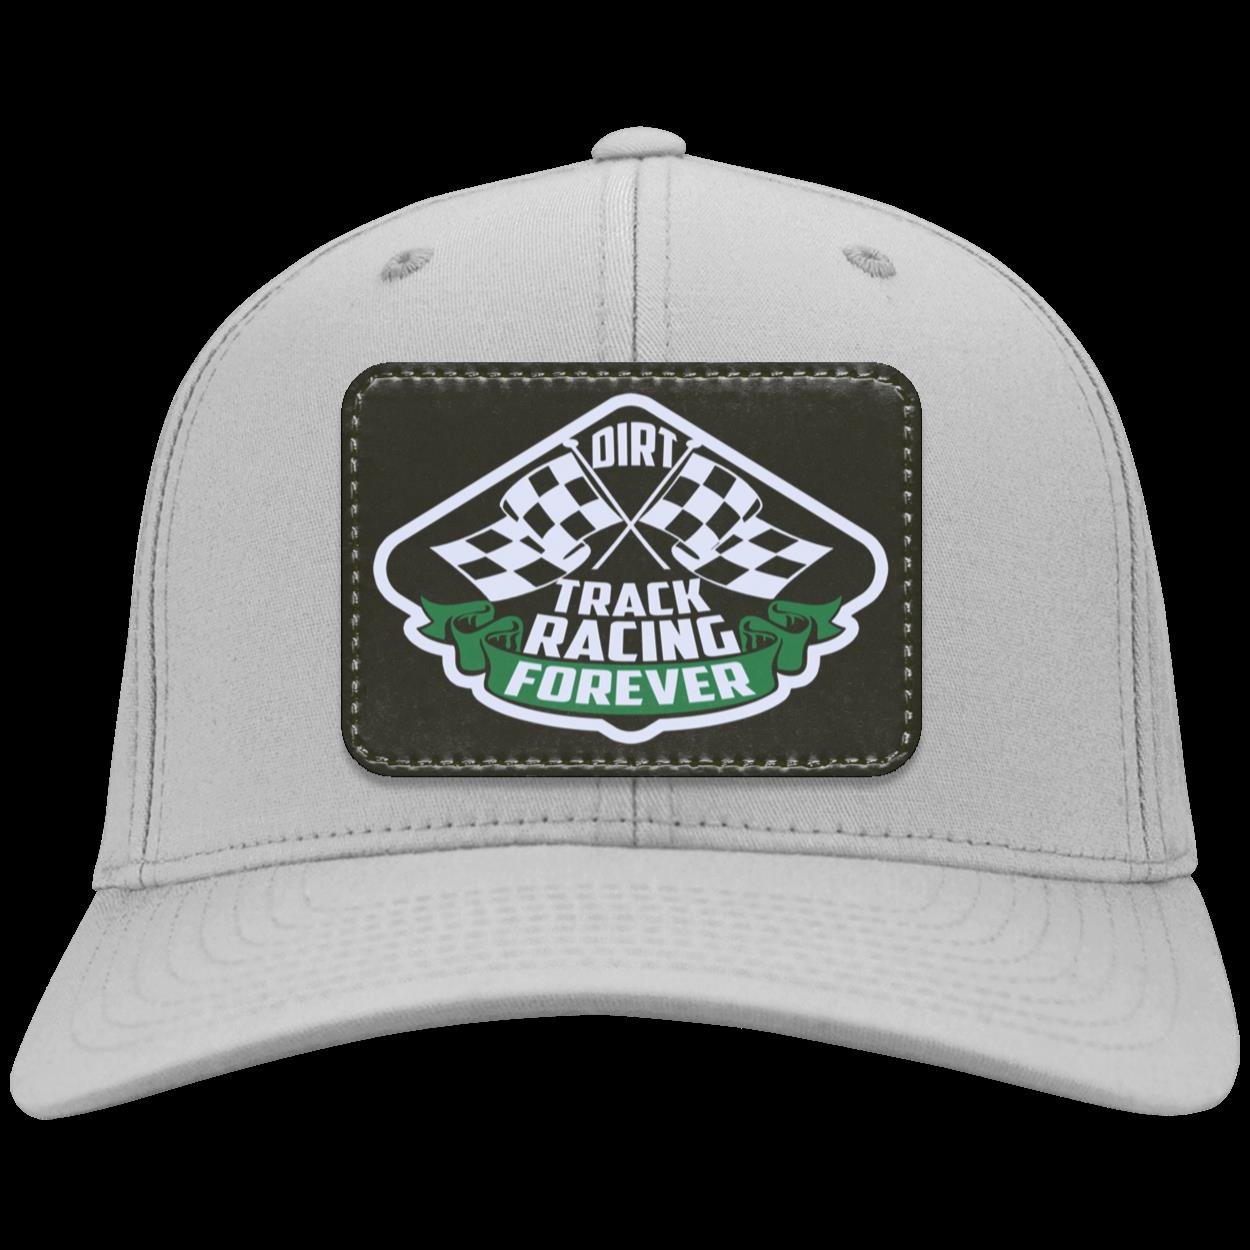 Dirt Track Racing Forever Patched Twill Cap V1